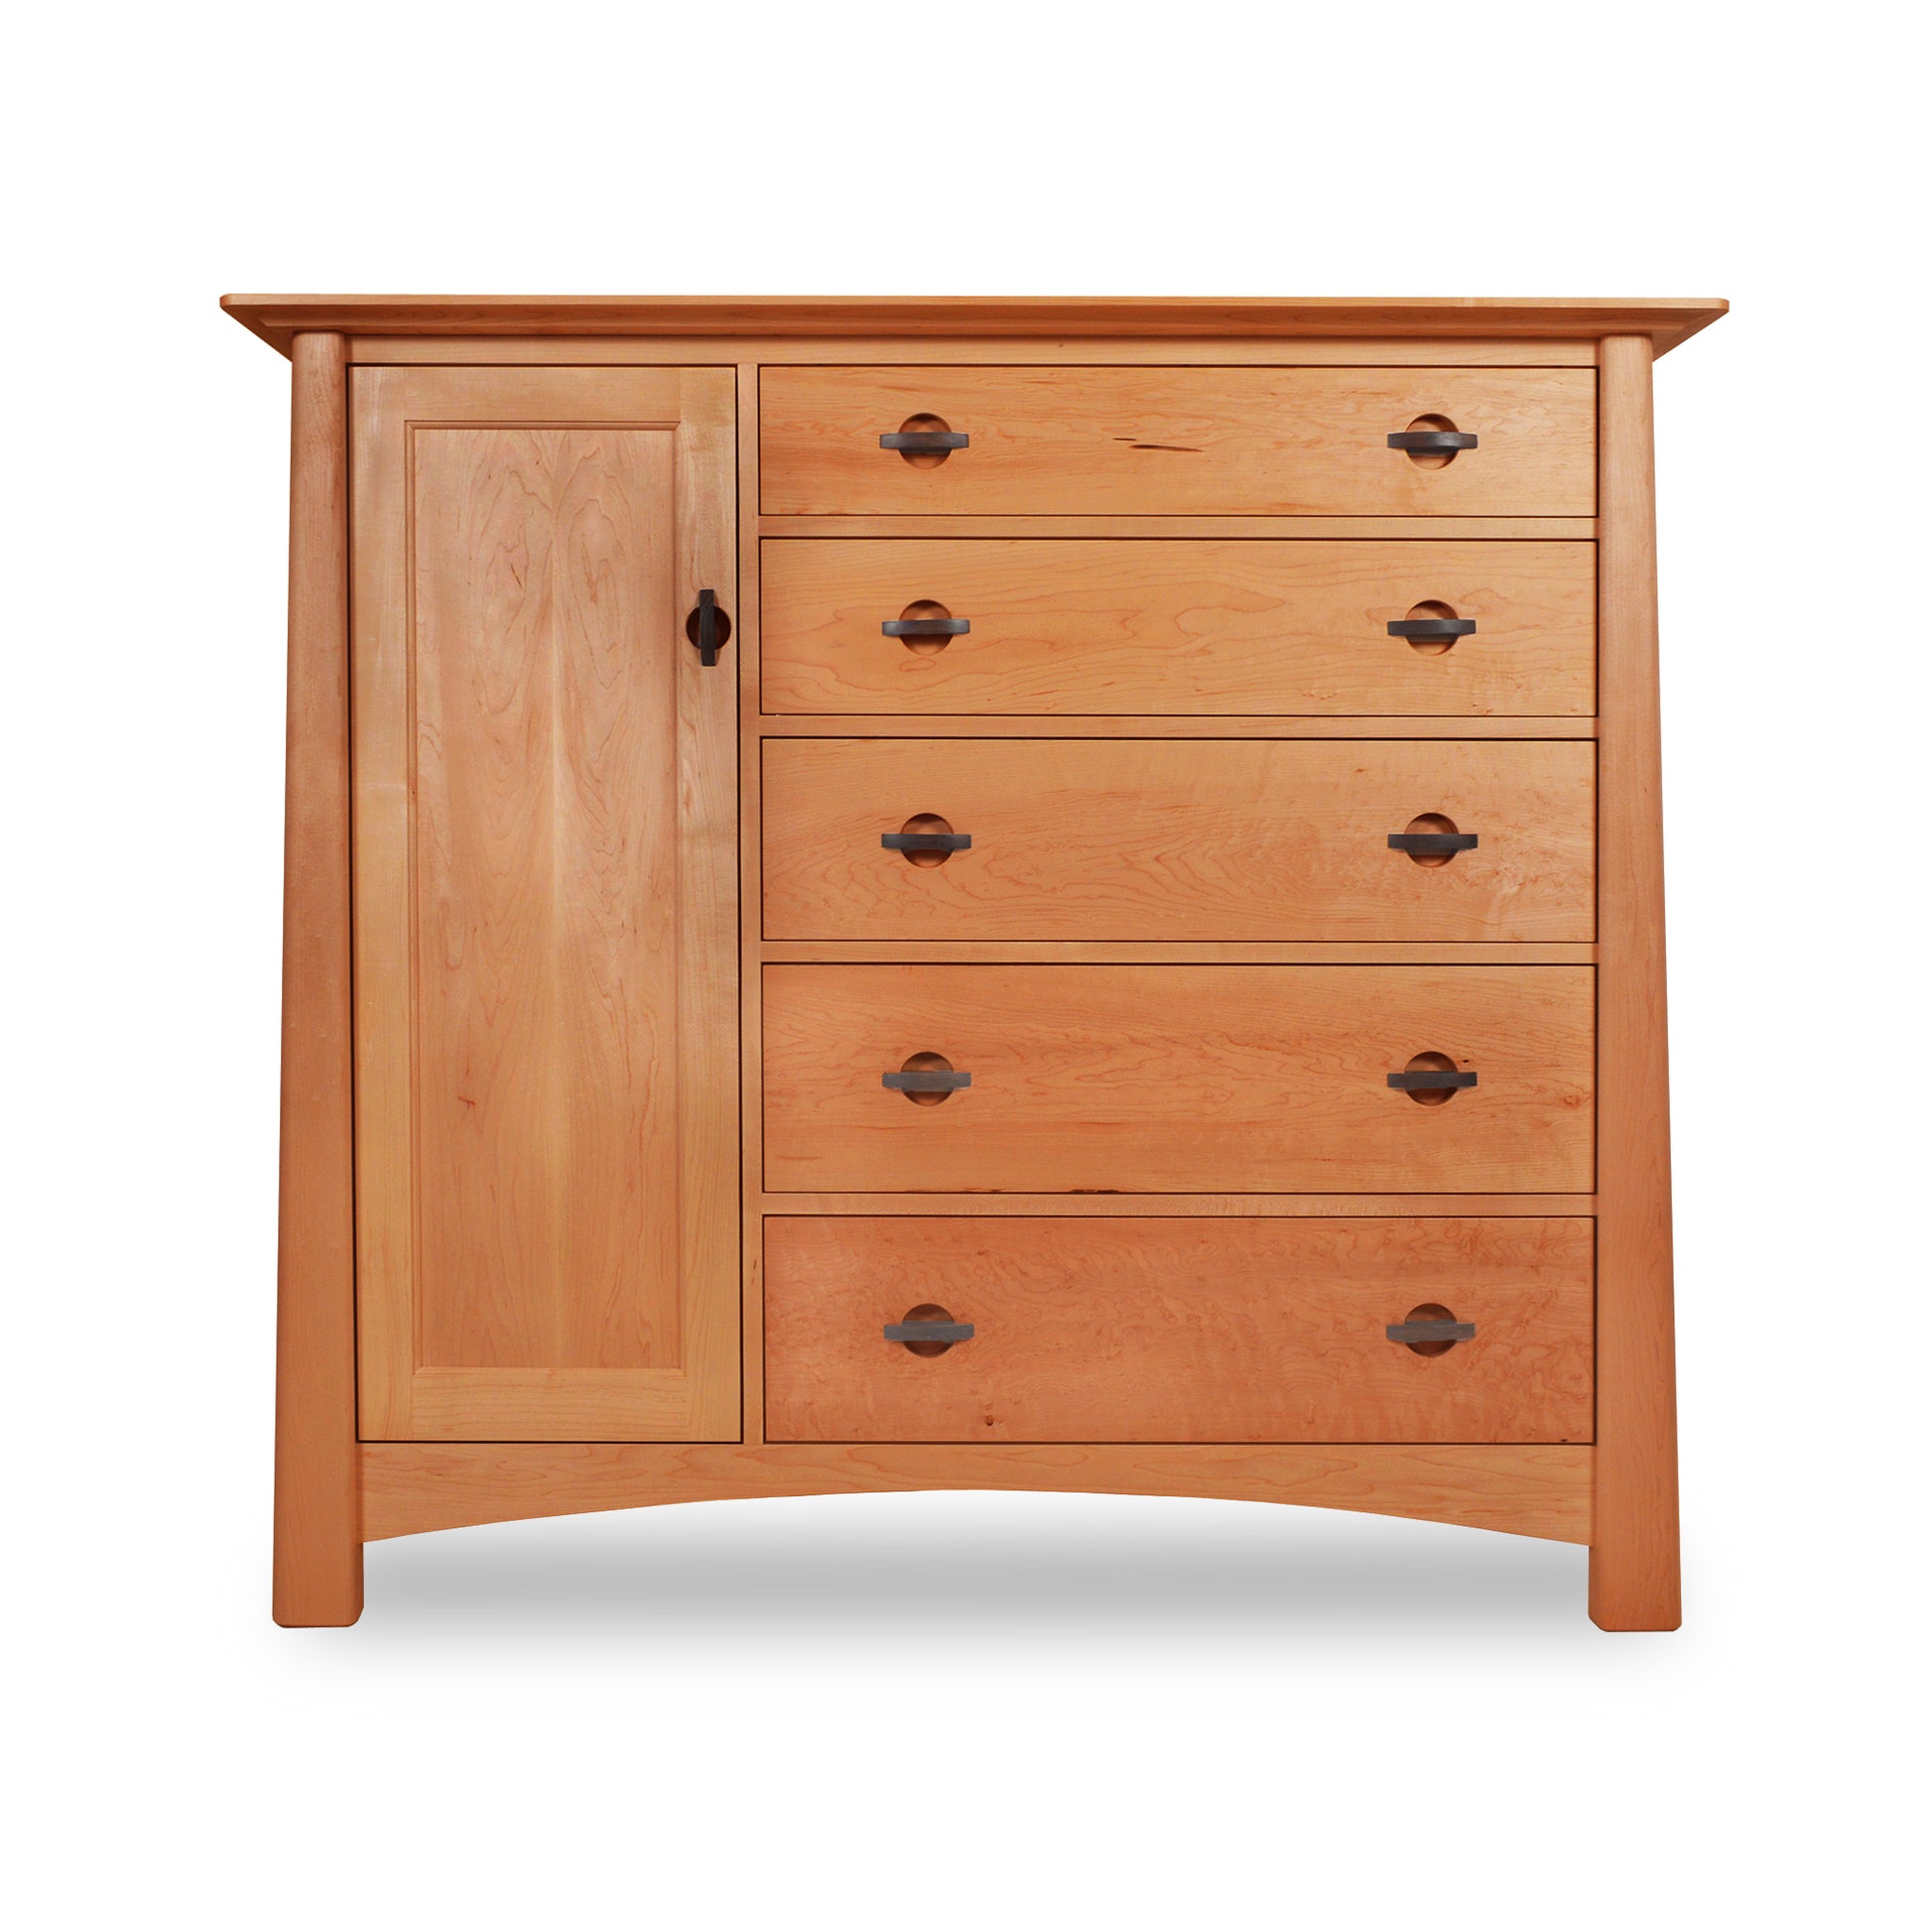 A Cherry Moon Gent's Chest from Maple Corner Woodworks with a cabinet on the left side and seven drawers on the right, featuring round handles, isolated on a white background.